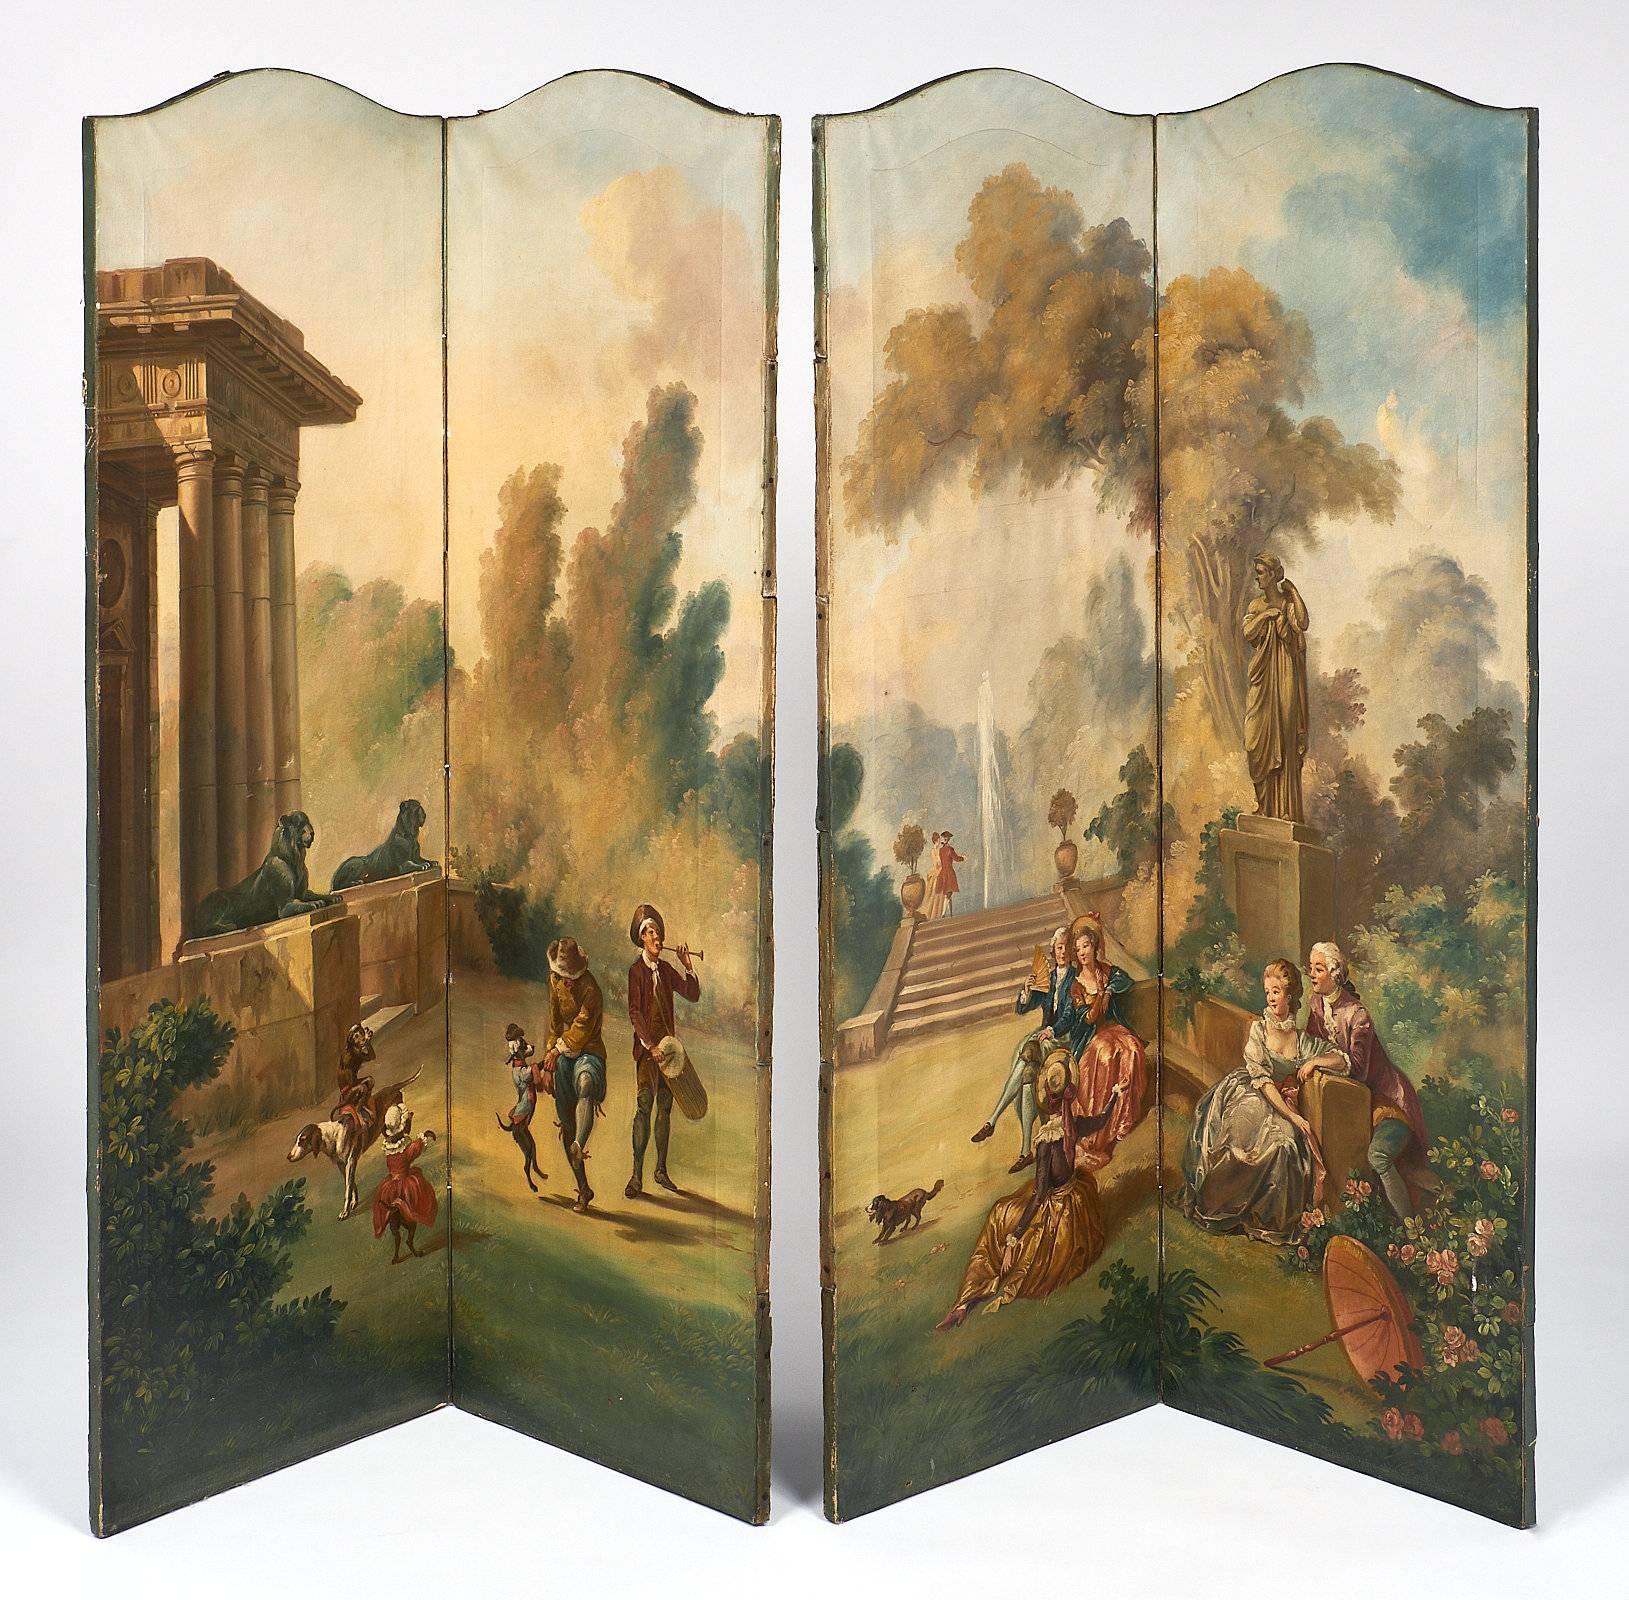 A French antique painted canvas screen with four panels featuring hand painted decor in a romantic pastorale fashion. Impressive architectural “ a L’Antique” and various romantic scenes are depicted in the foreground, along with monkeys and